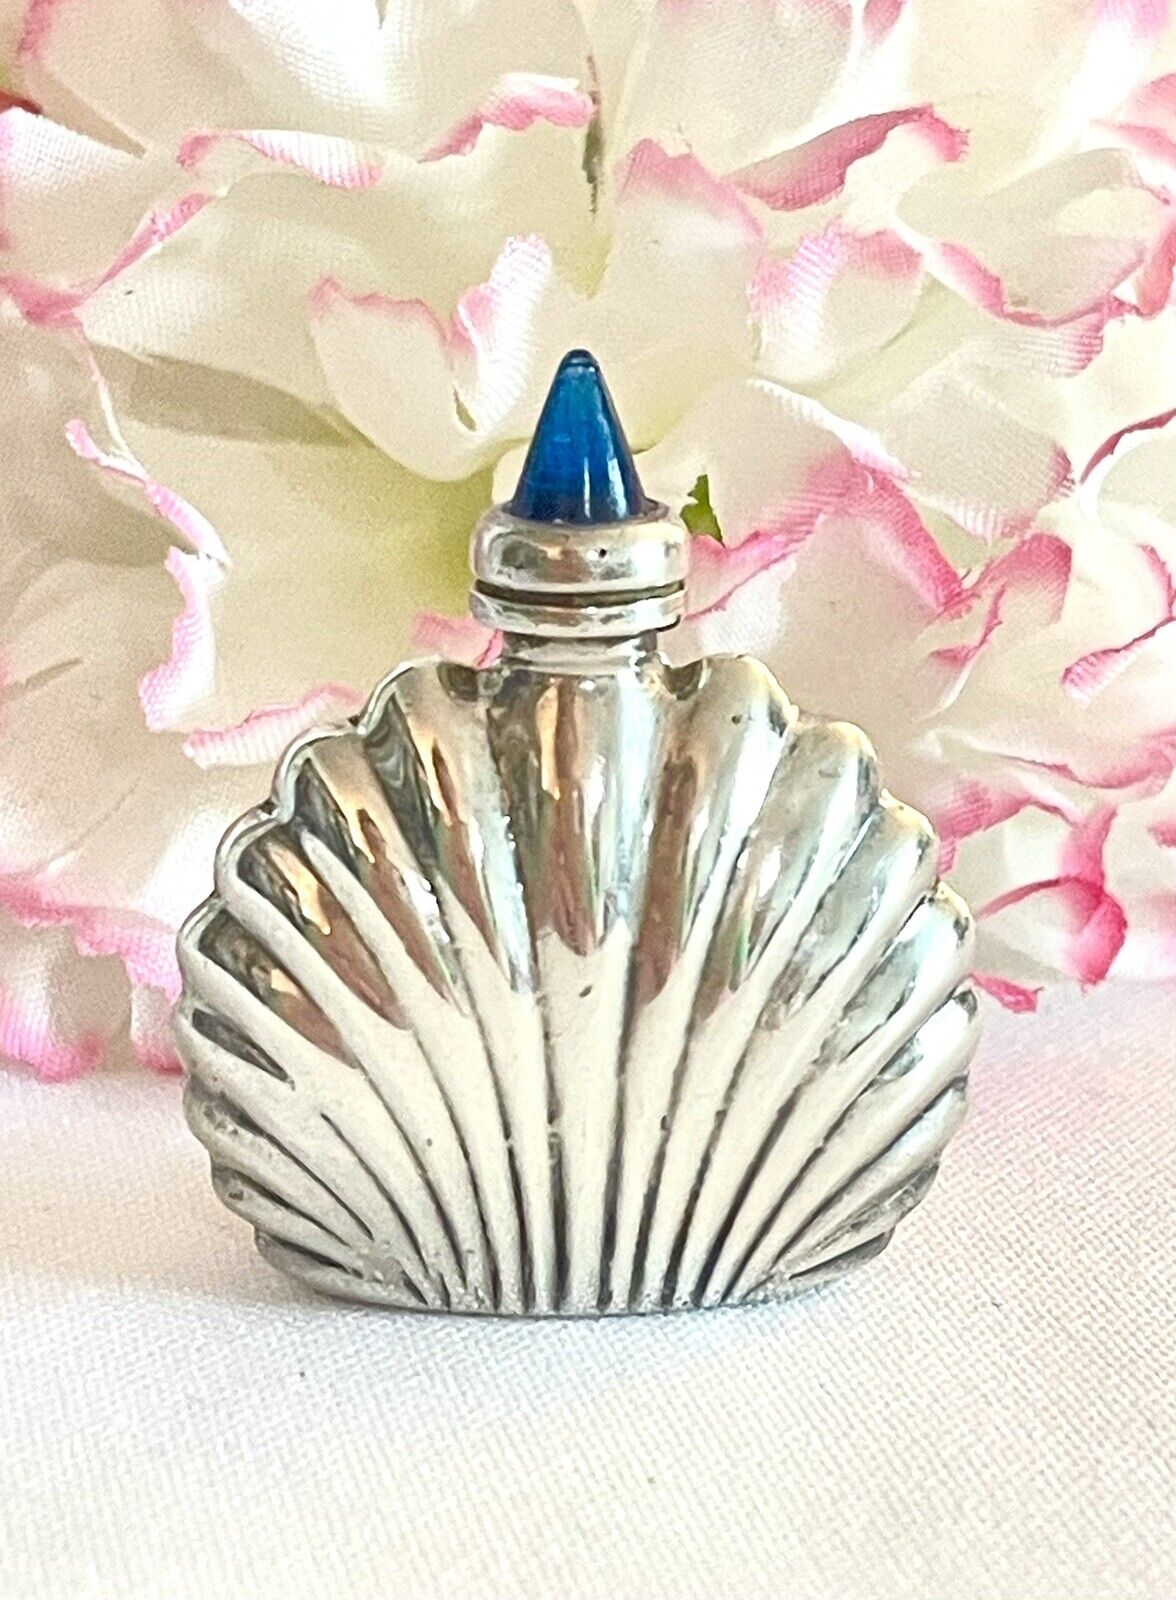 Vintage Sterling Silver Jeweled Perfume Bottle Clamshell Clam Shell Mexico